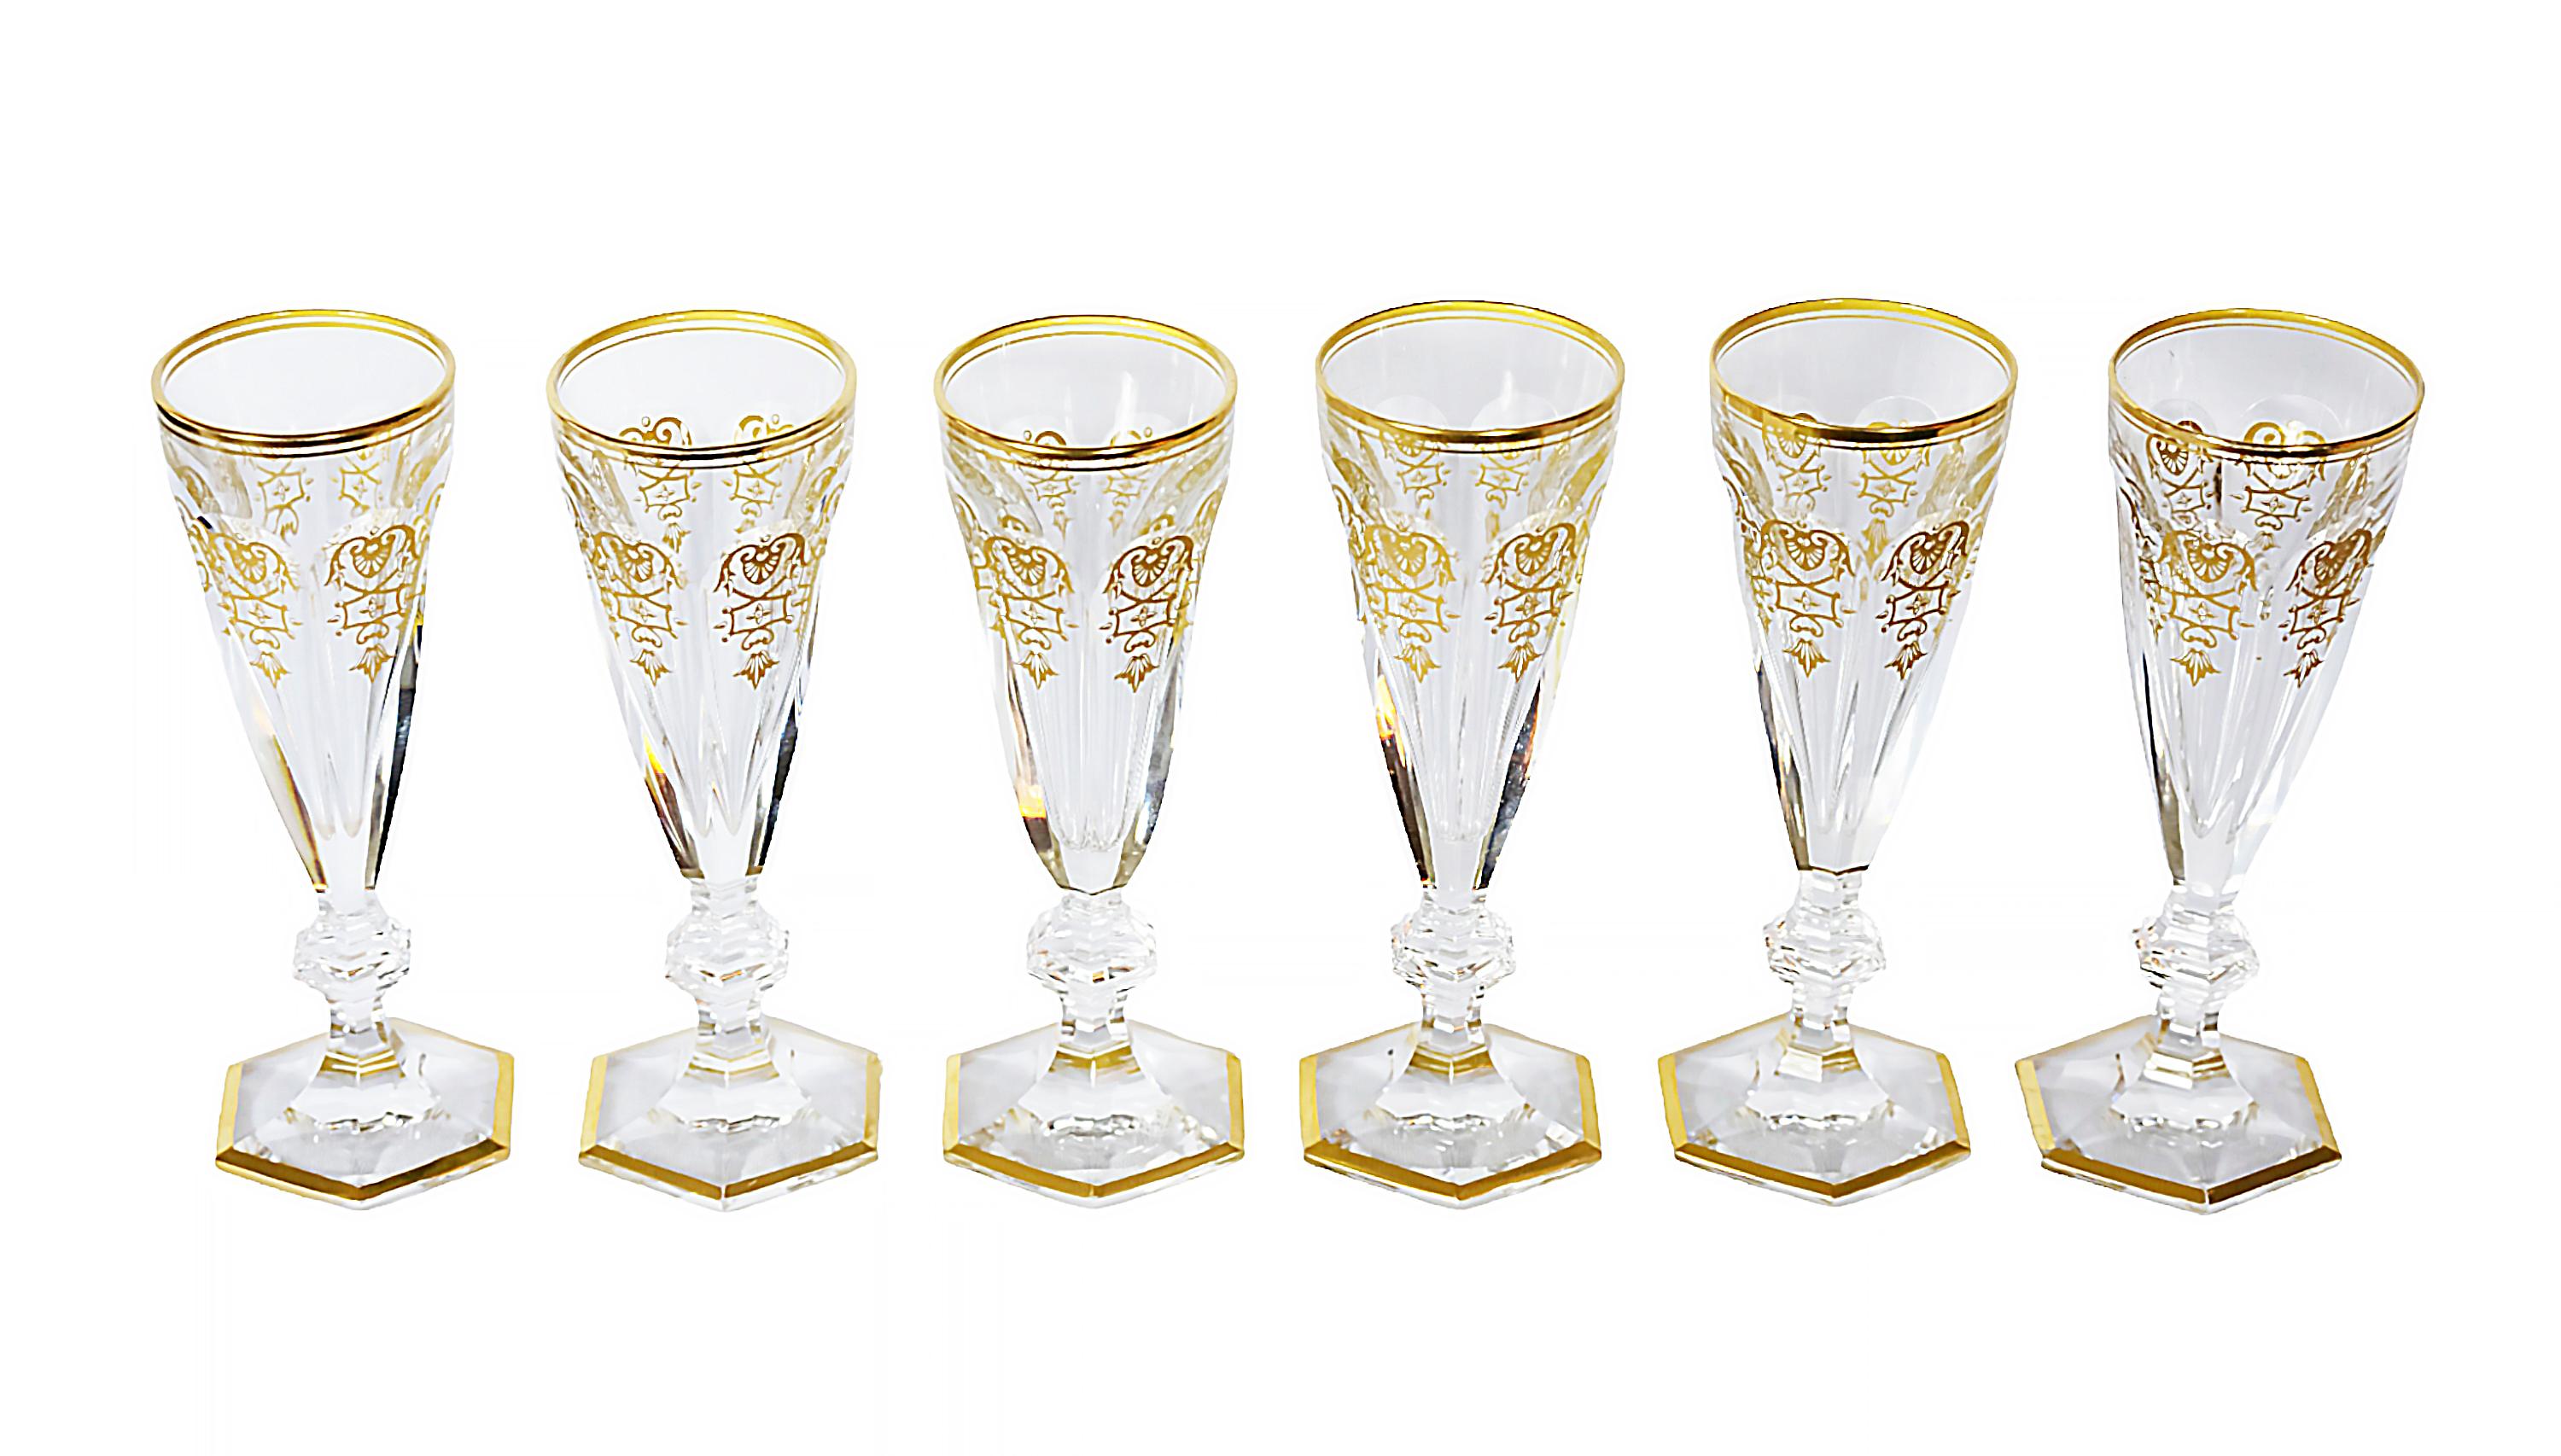 Set of 6 pcs. Baccarat Harcourt Empire collection champagne flutes.
Marked on the bottom.
Very good condition - like new.

